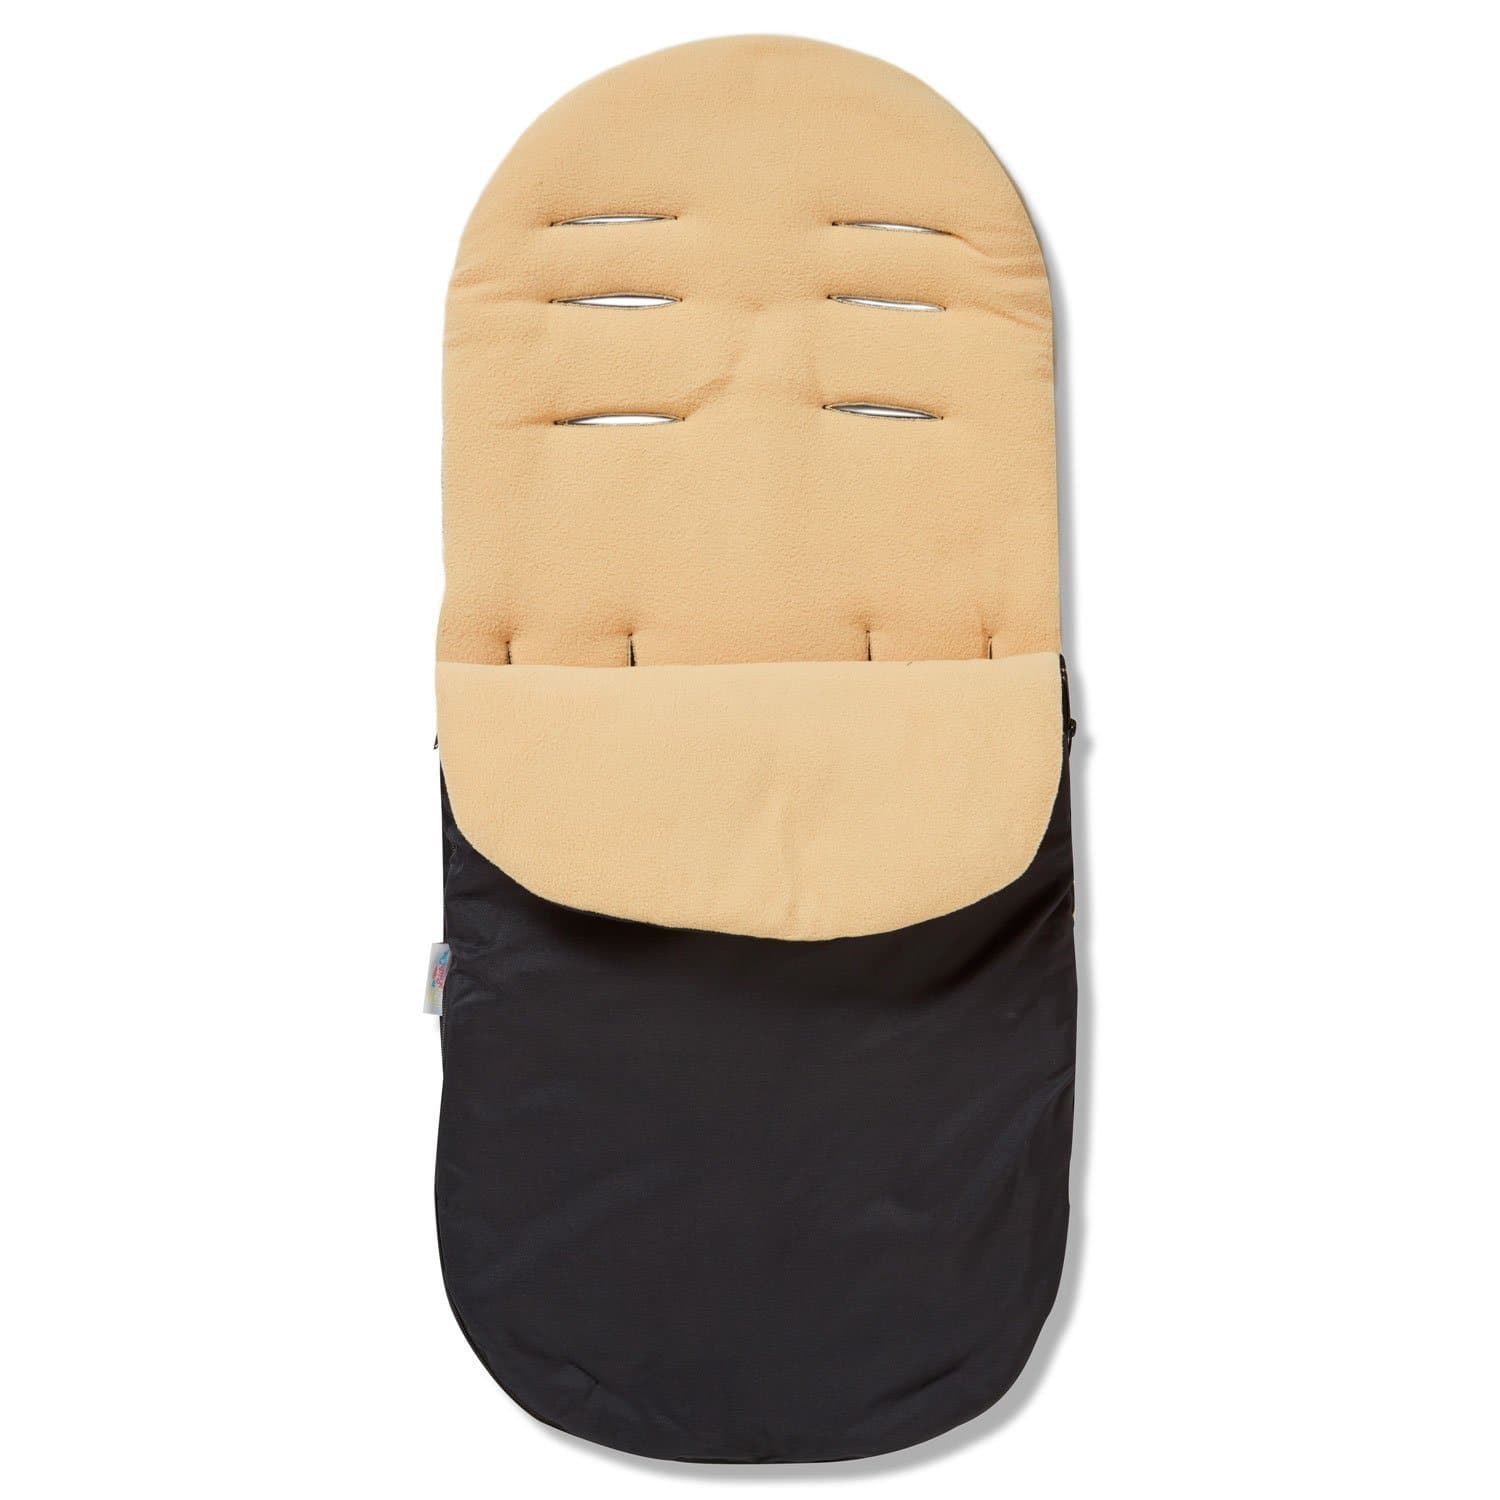 Footmuff / Cosy Toes Compatible with Bugaboo - Sand / Fits All Models | For Your Little One